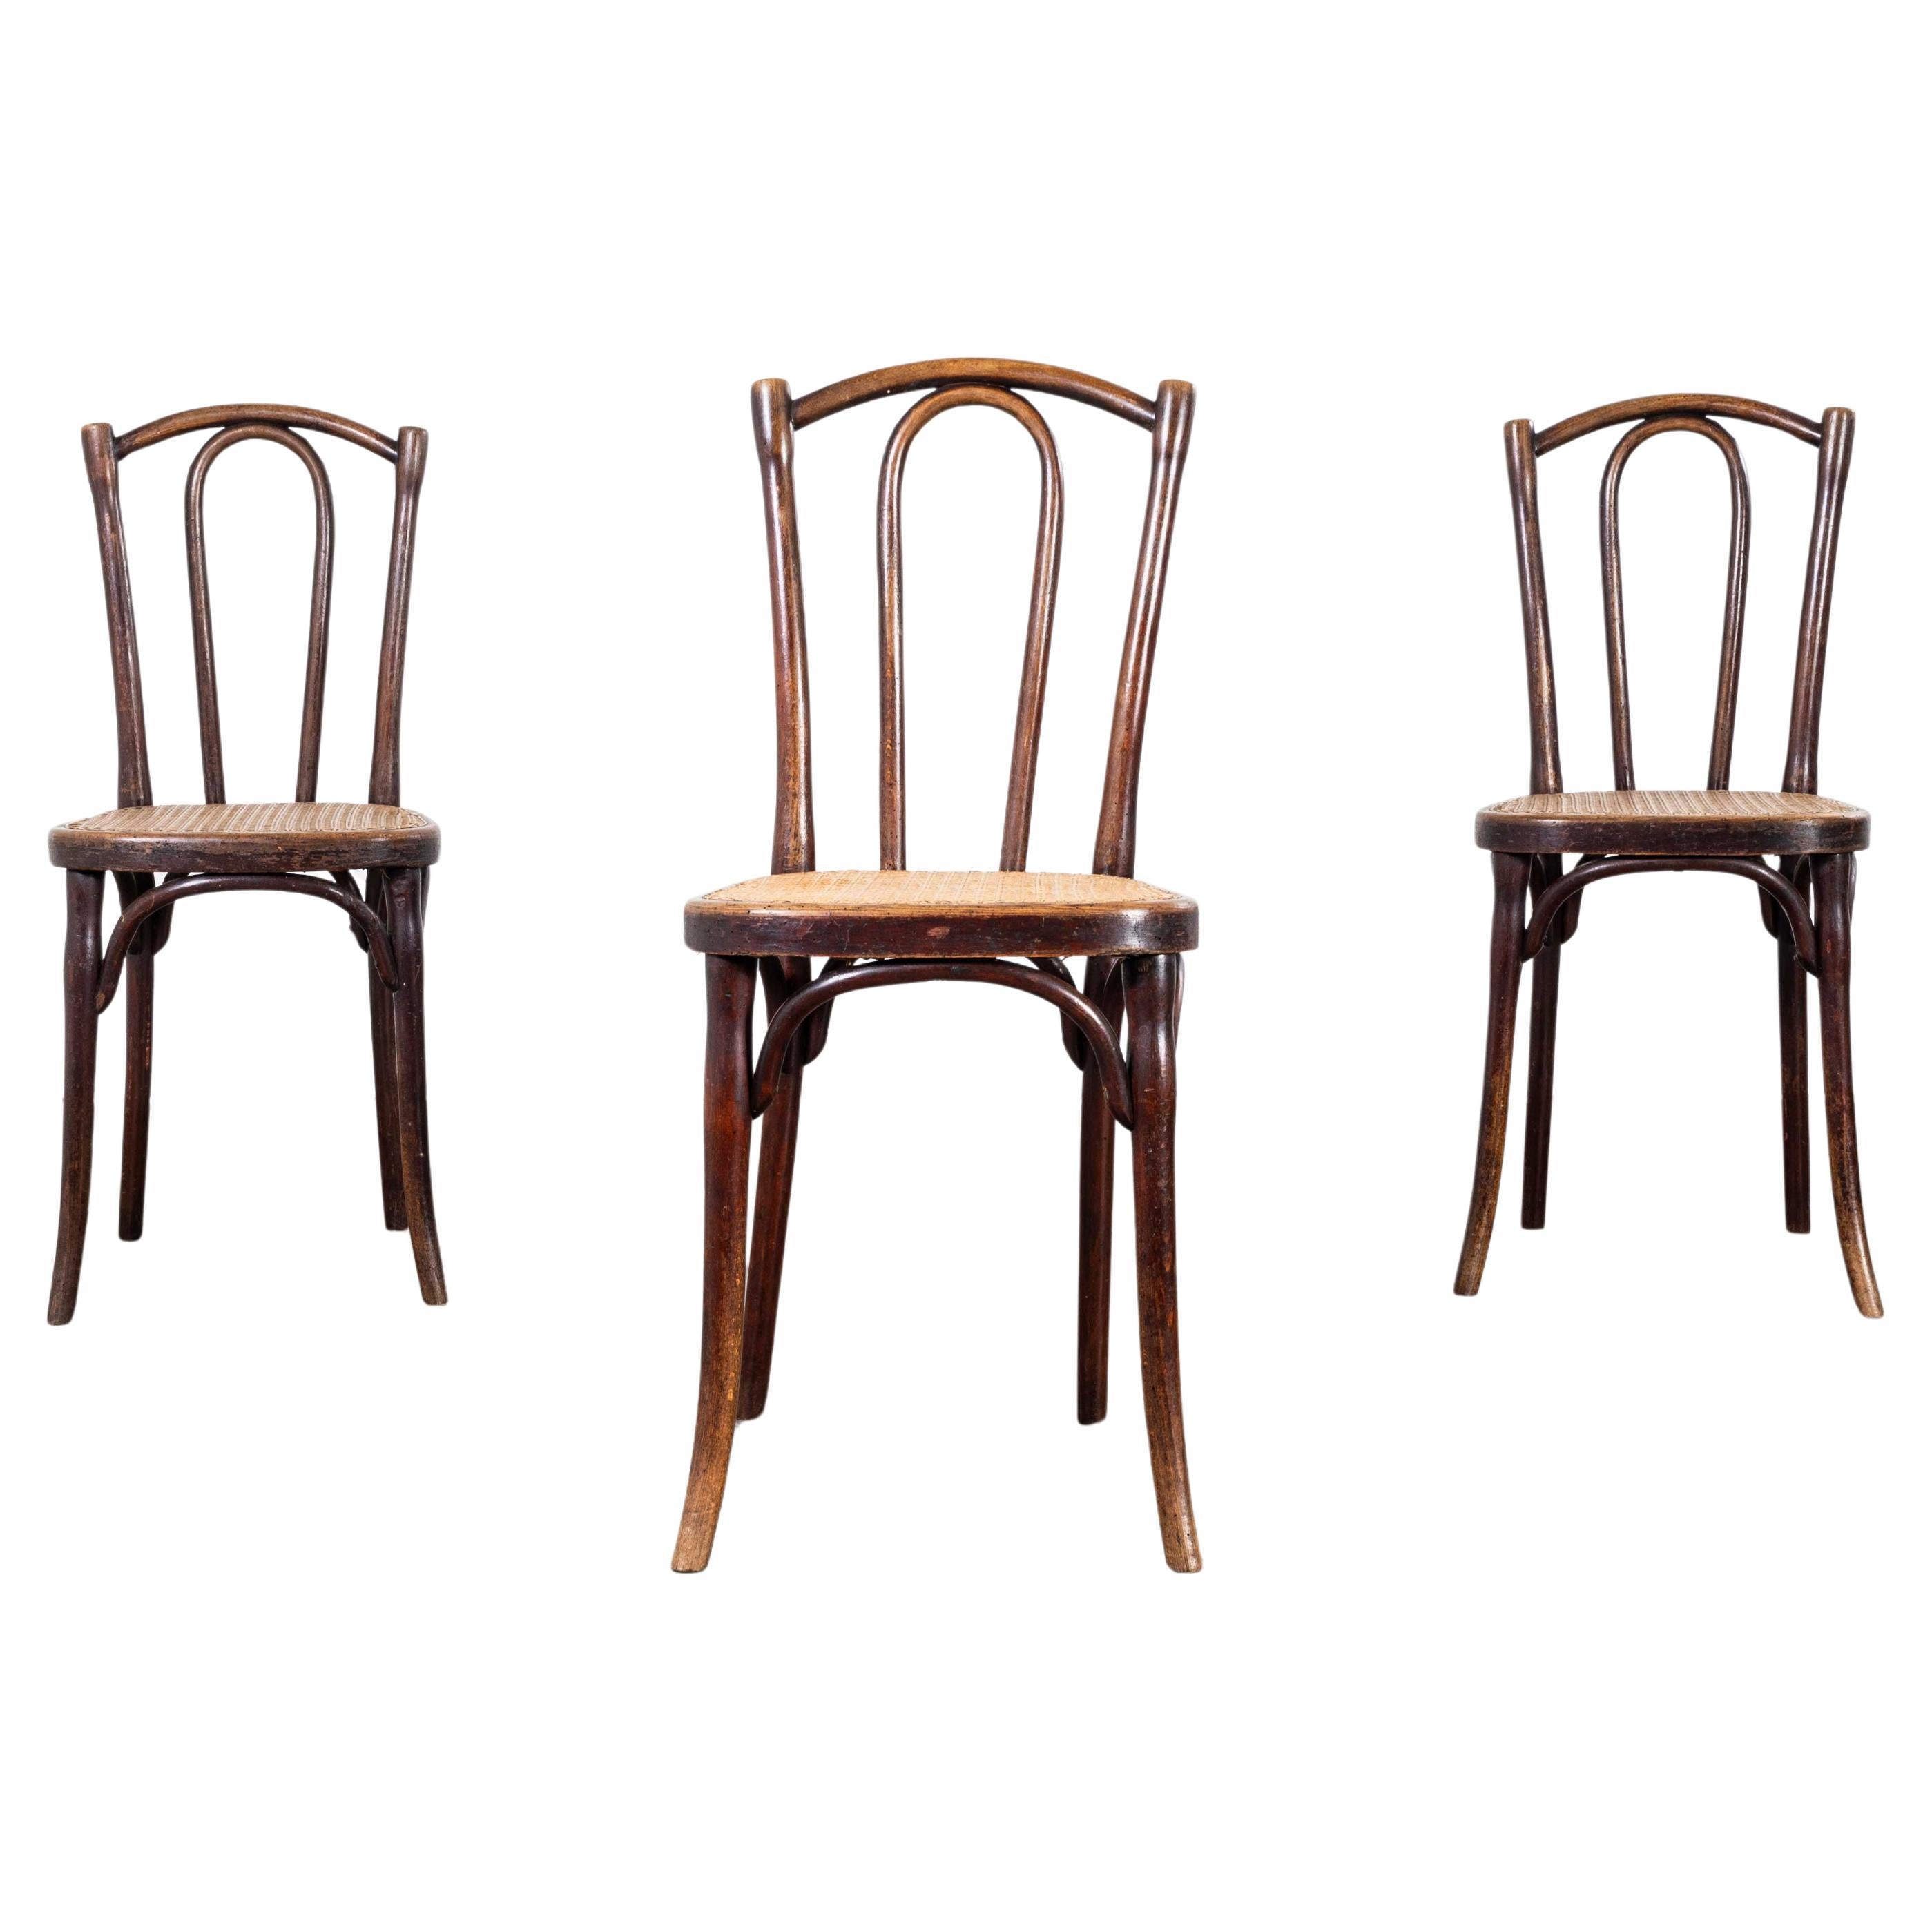 1920’s Thonet Original Cane Seated Dining Chairs – Set of Three